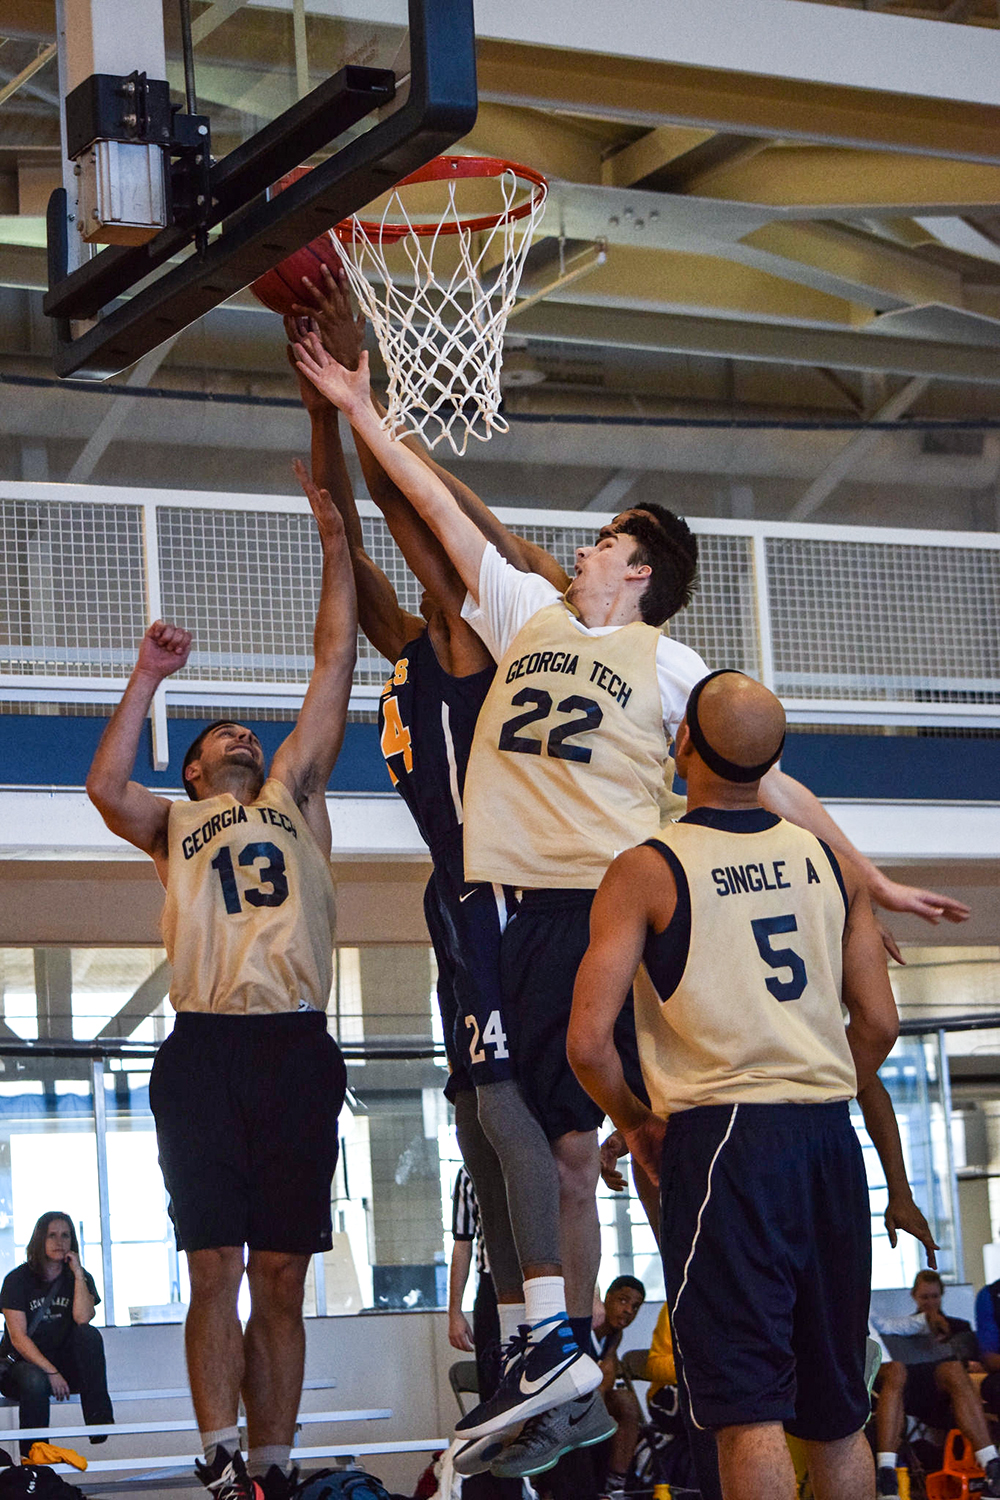 Members of the Georgia Tech men's All-Stars team play in the 2016 NIRSA Regional Basketball Championships at the CRC.